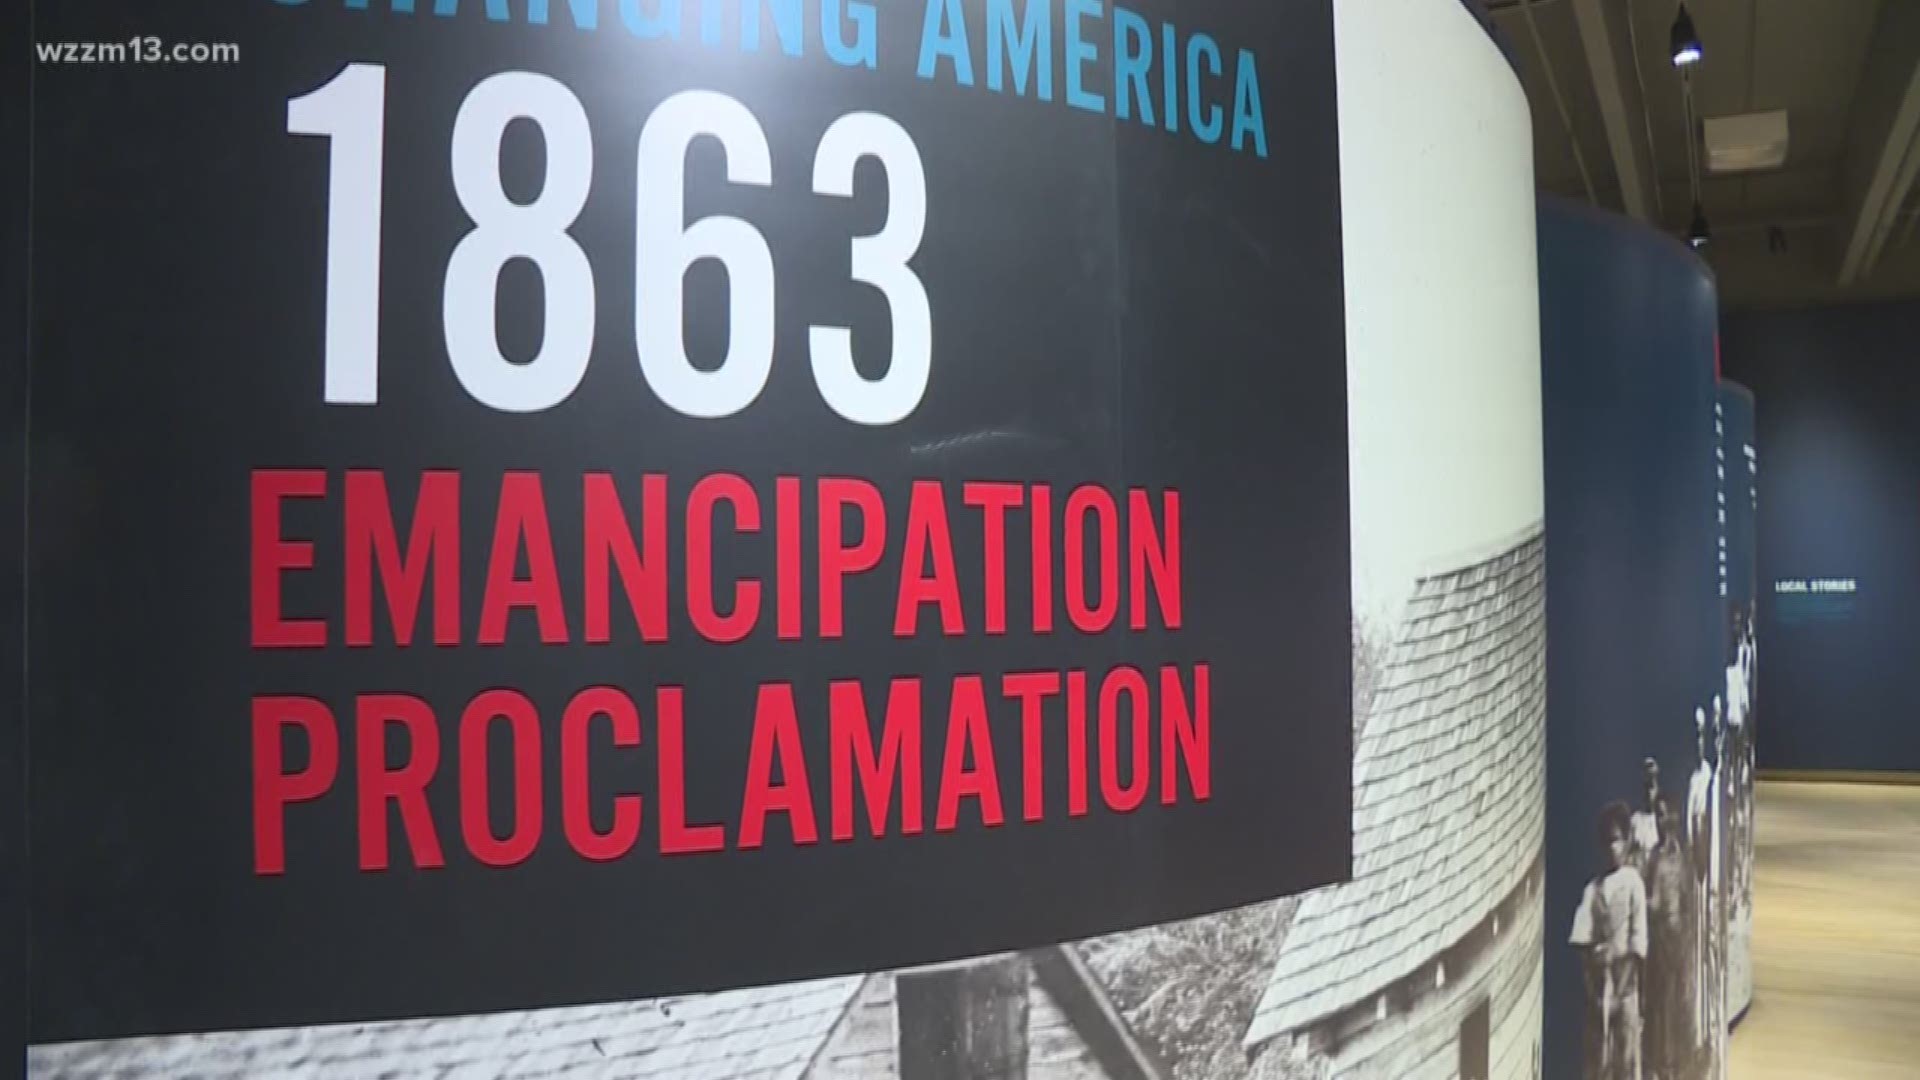 Social movements and the changing social landscape of the country over the last century and a half are the focus of a new exhibit at the Grand Rapids Public Museum.